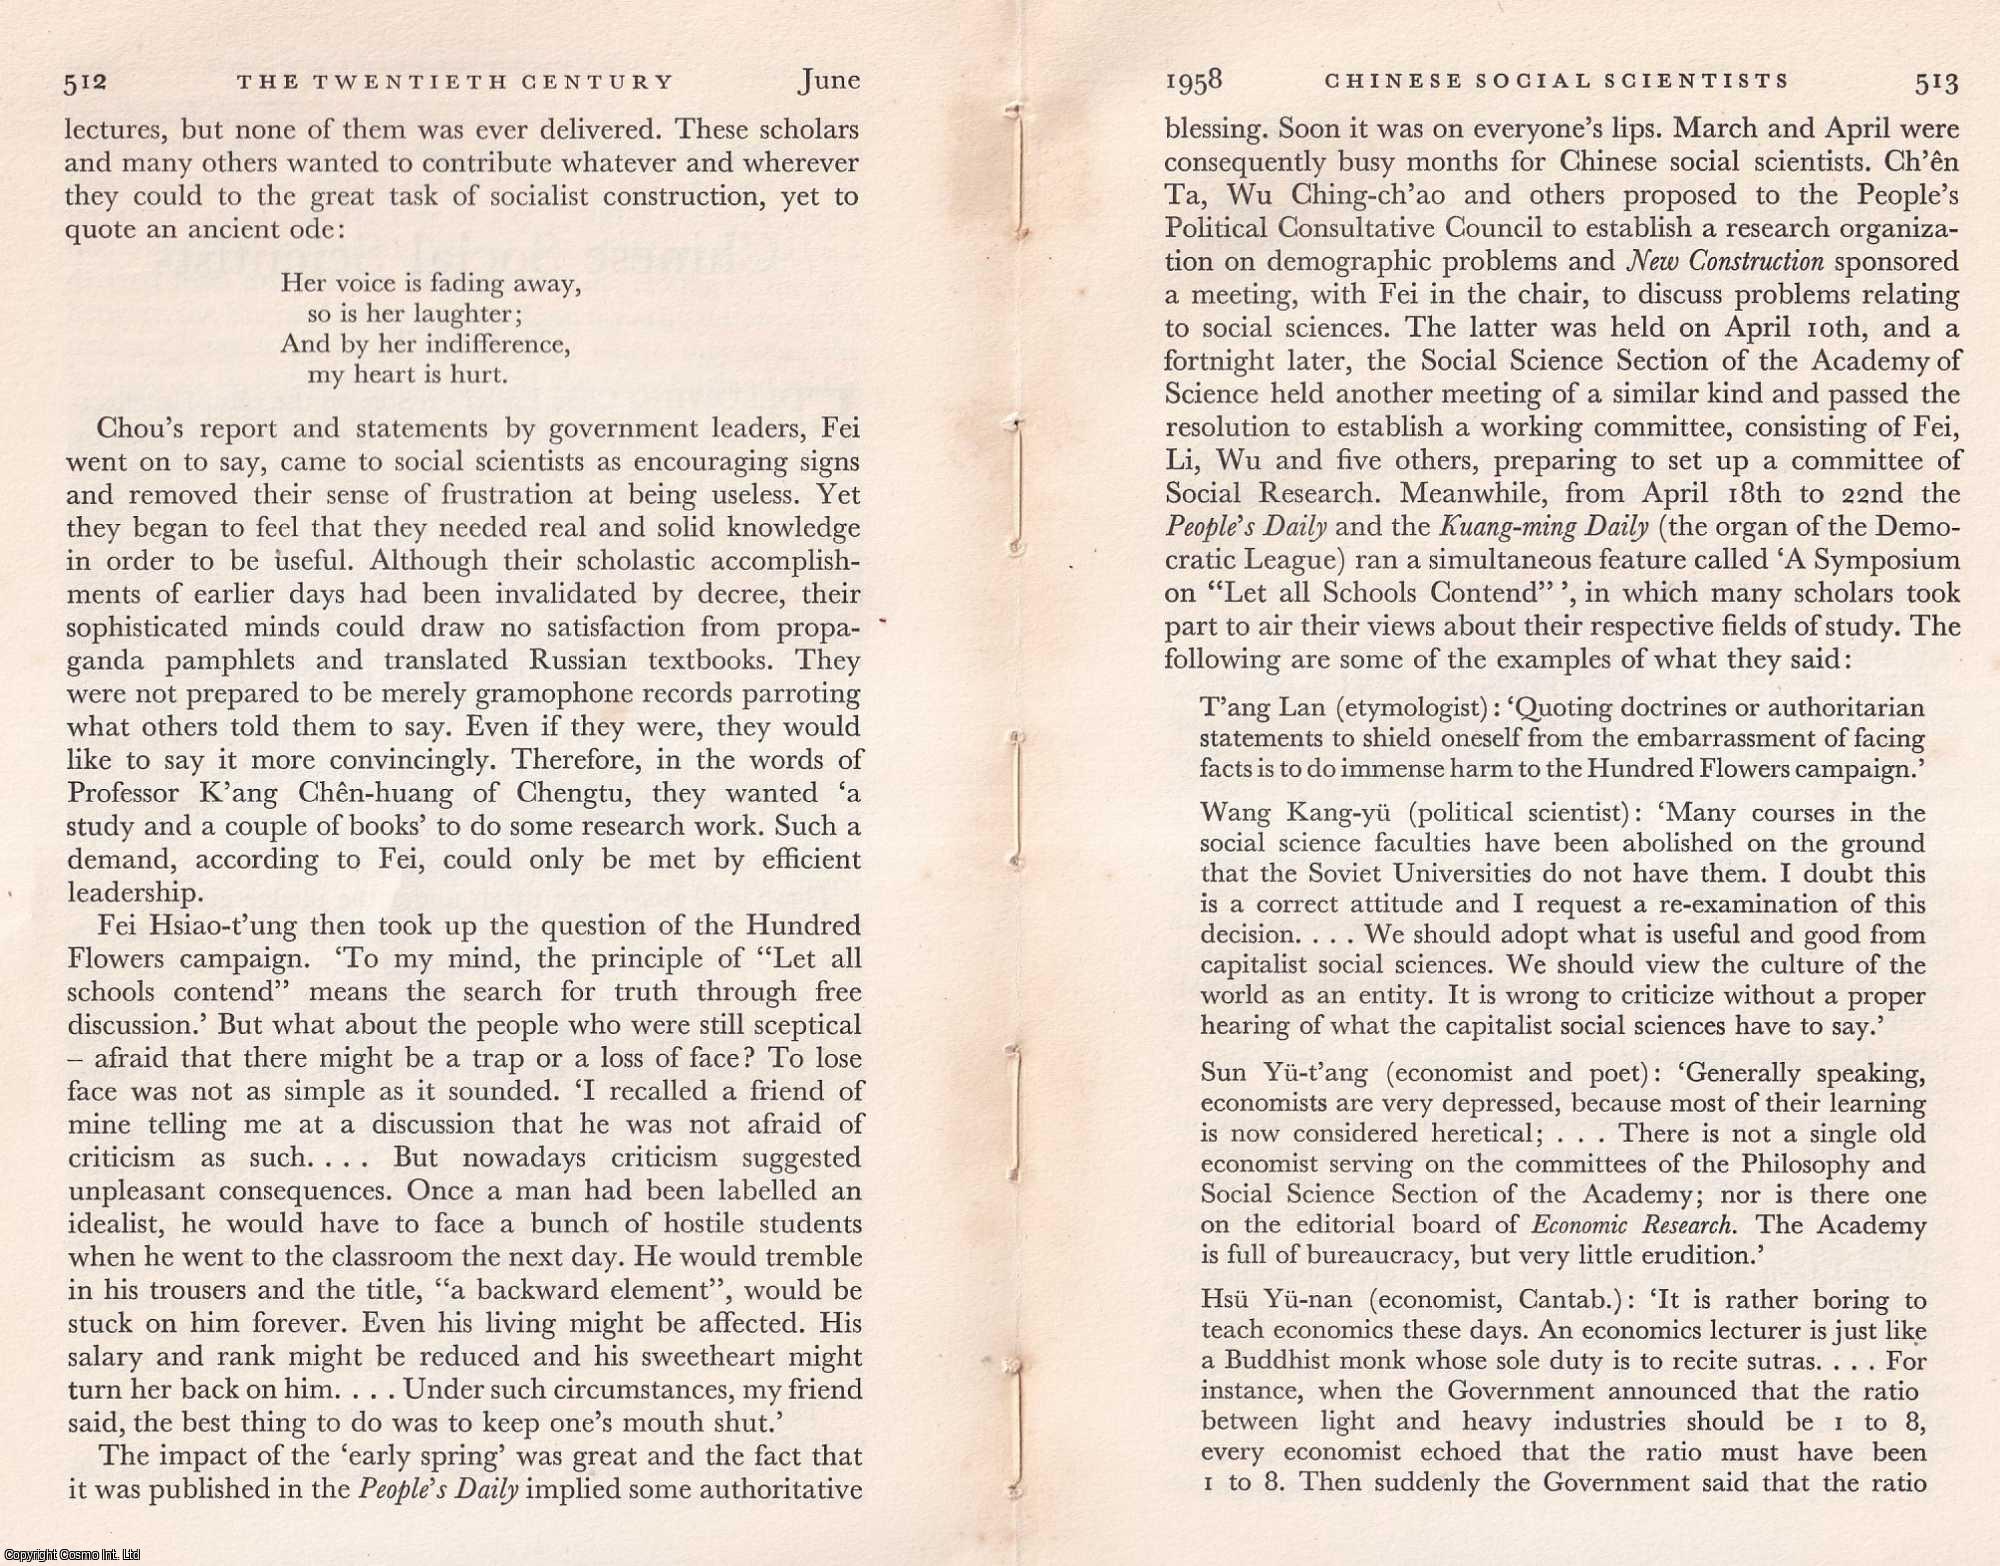 C. J. Ch'en - Chinese Social Scientists. An original article from The Twentieth Century, 1958.